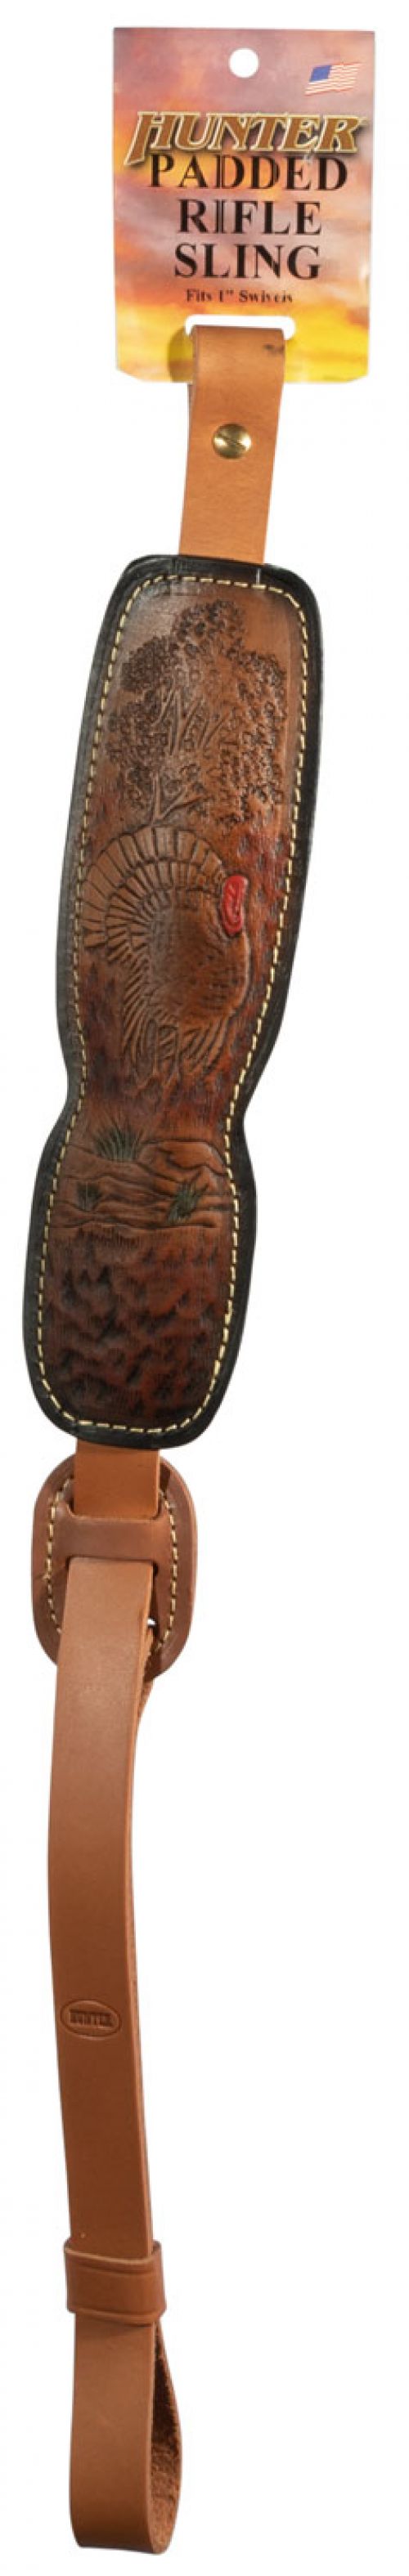 Hunter Company Cobra Trophy Custom Sling with Turkey Engraving 1 Swivel Leather Brown